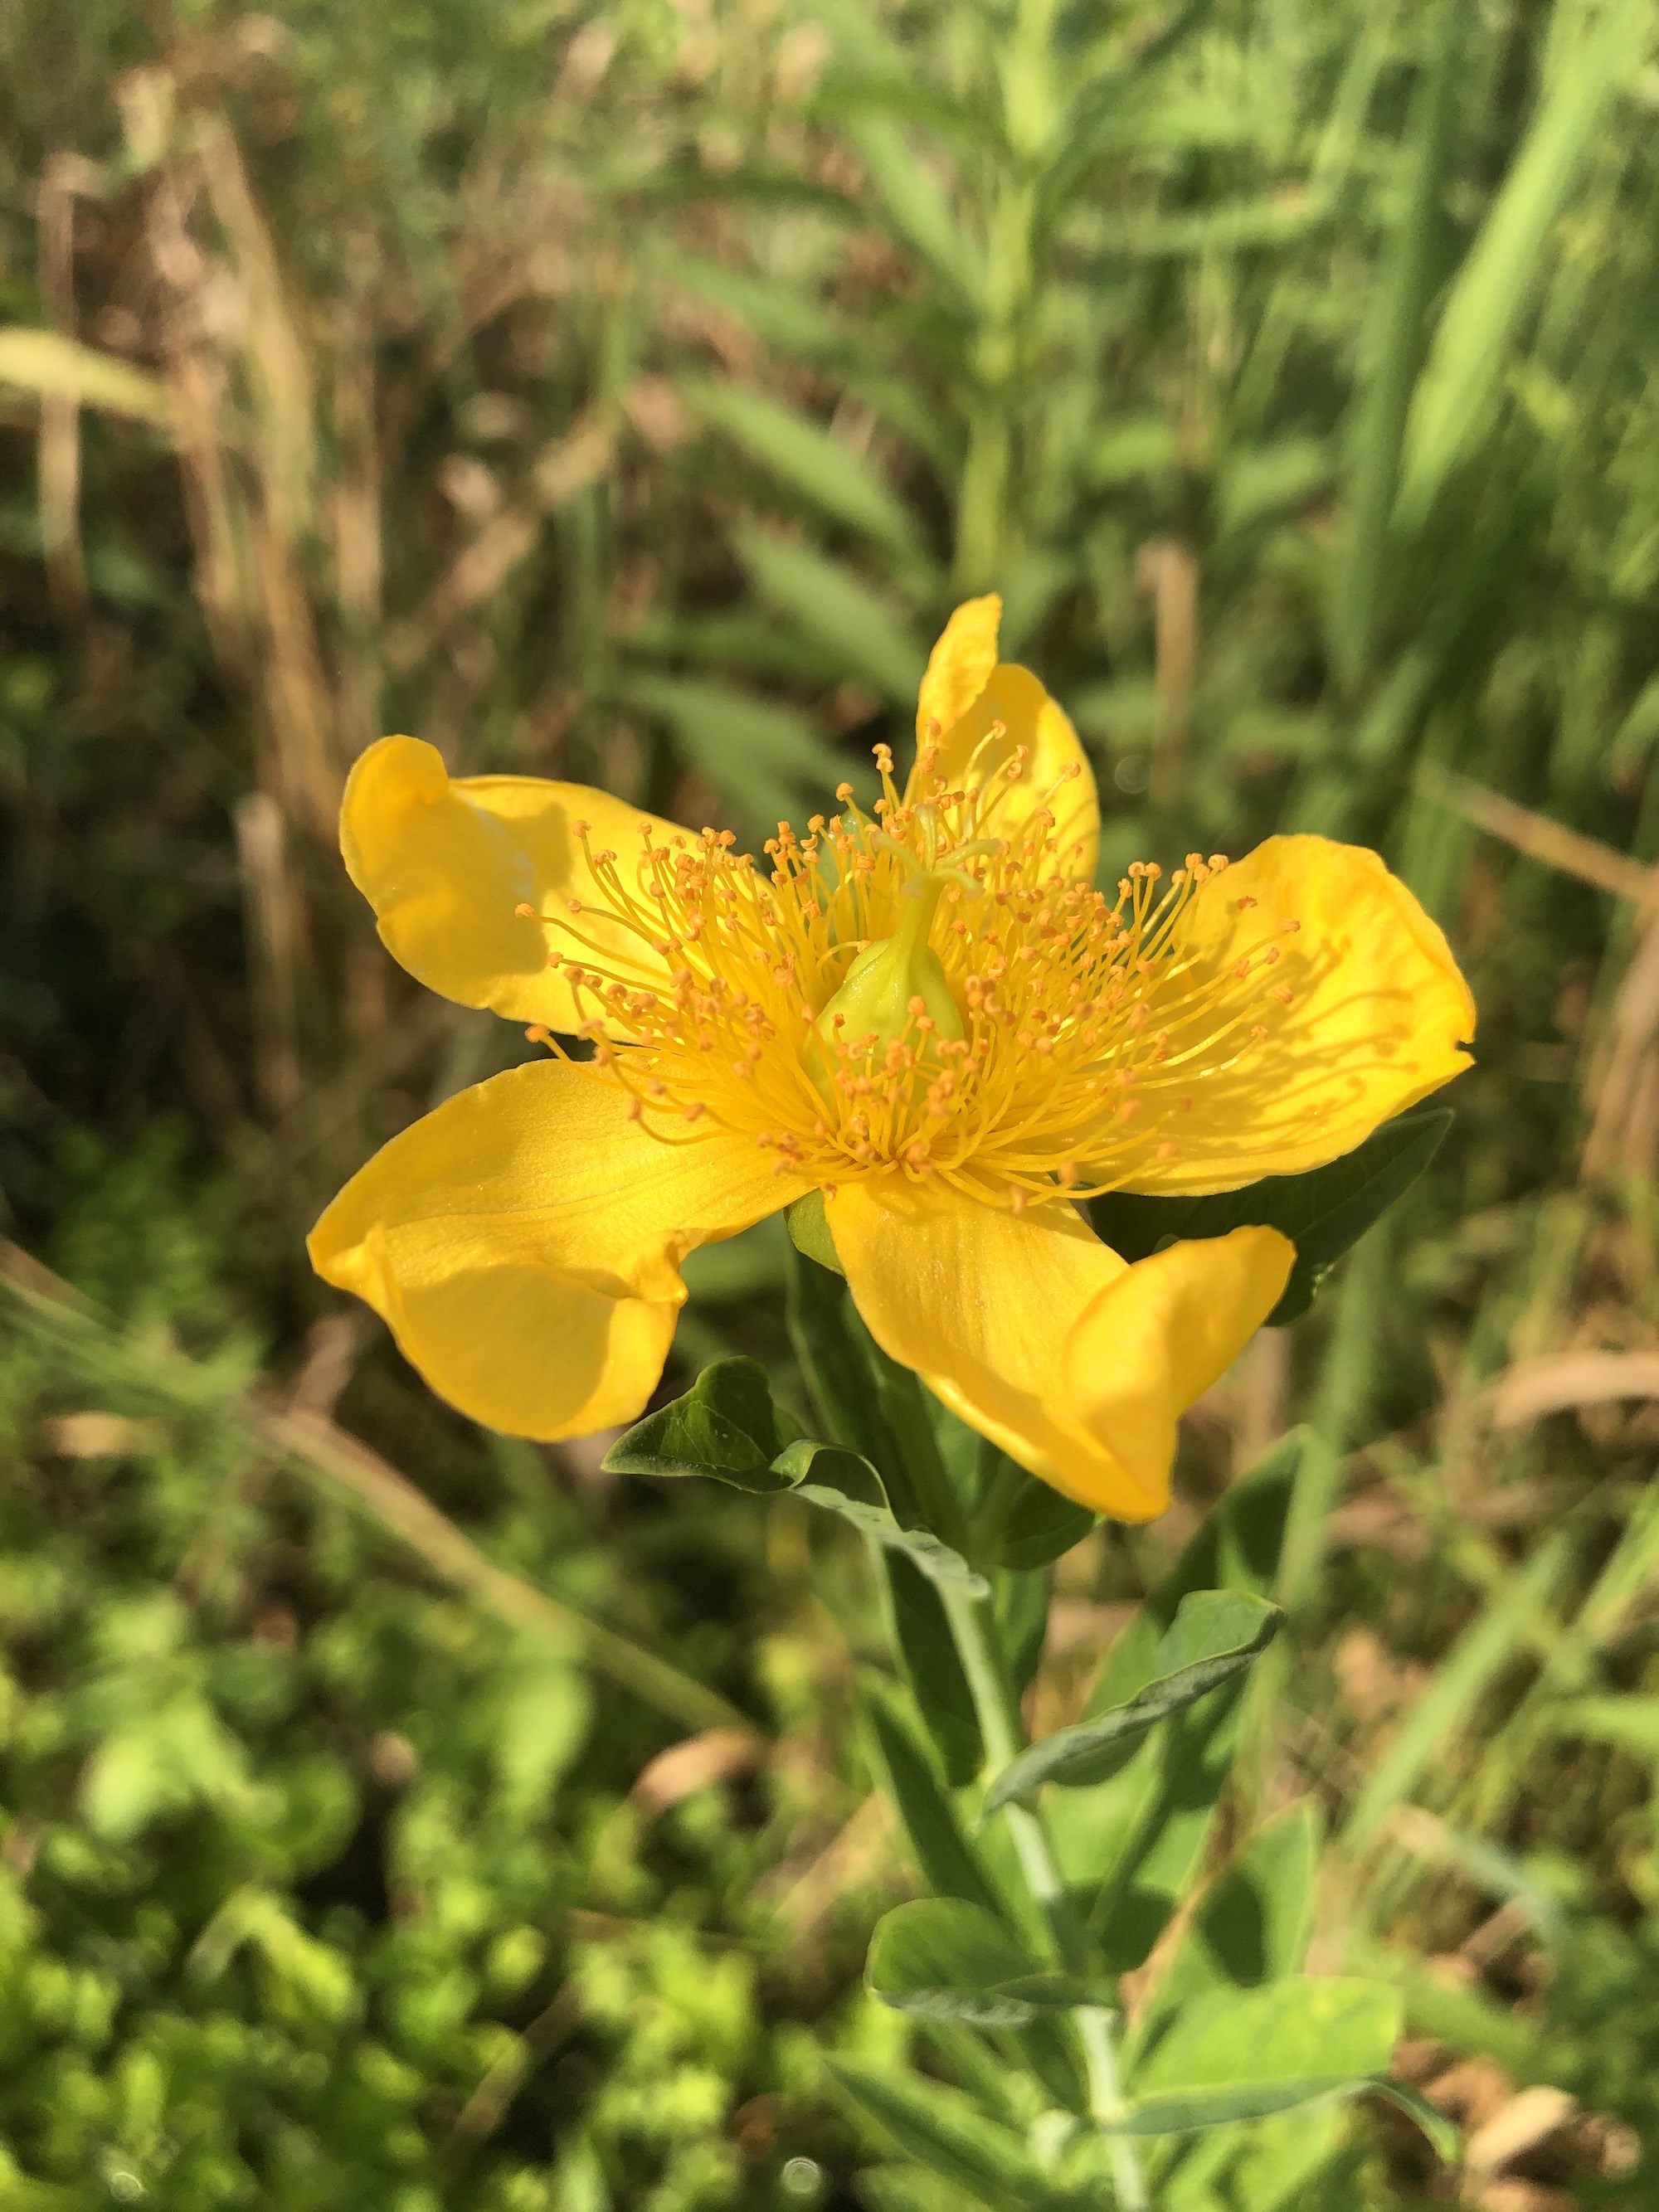 Great St. John's wort on bank of Marion Dunn Pond on July 11, 2020.